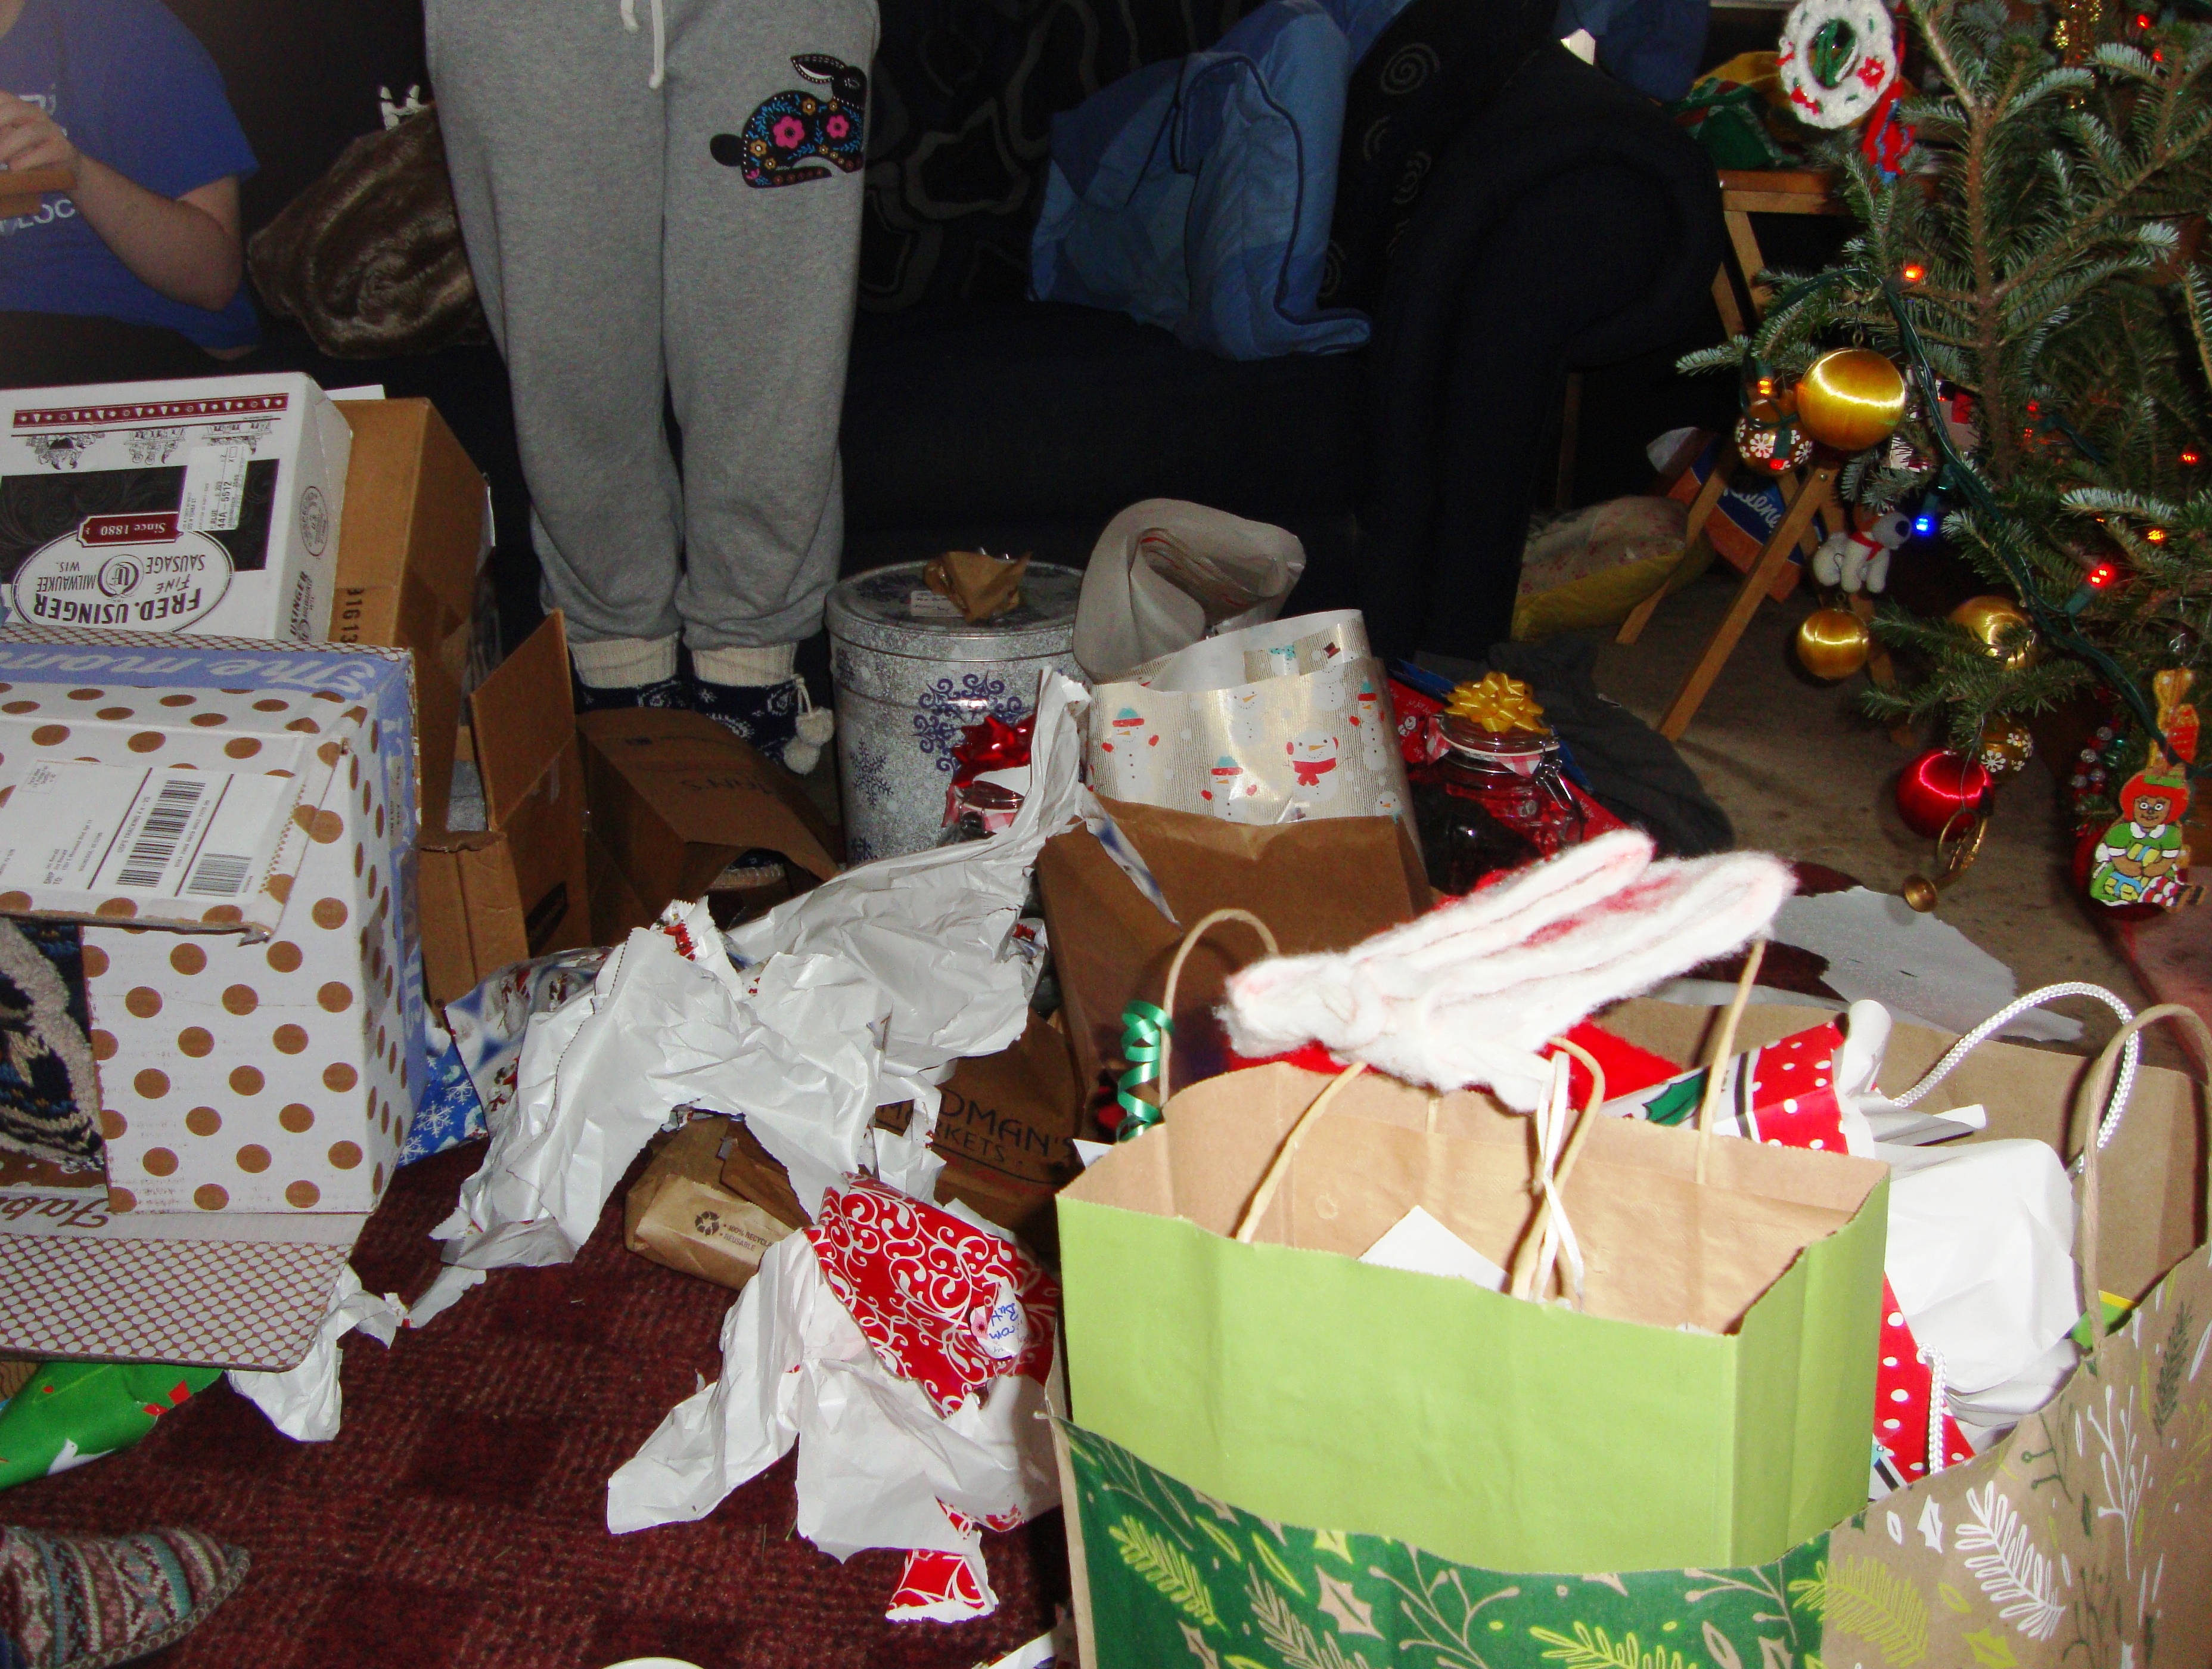 the chaos after opening gifts